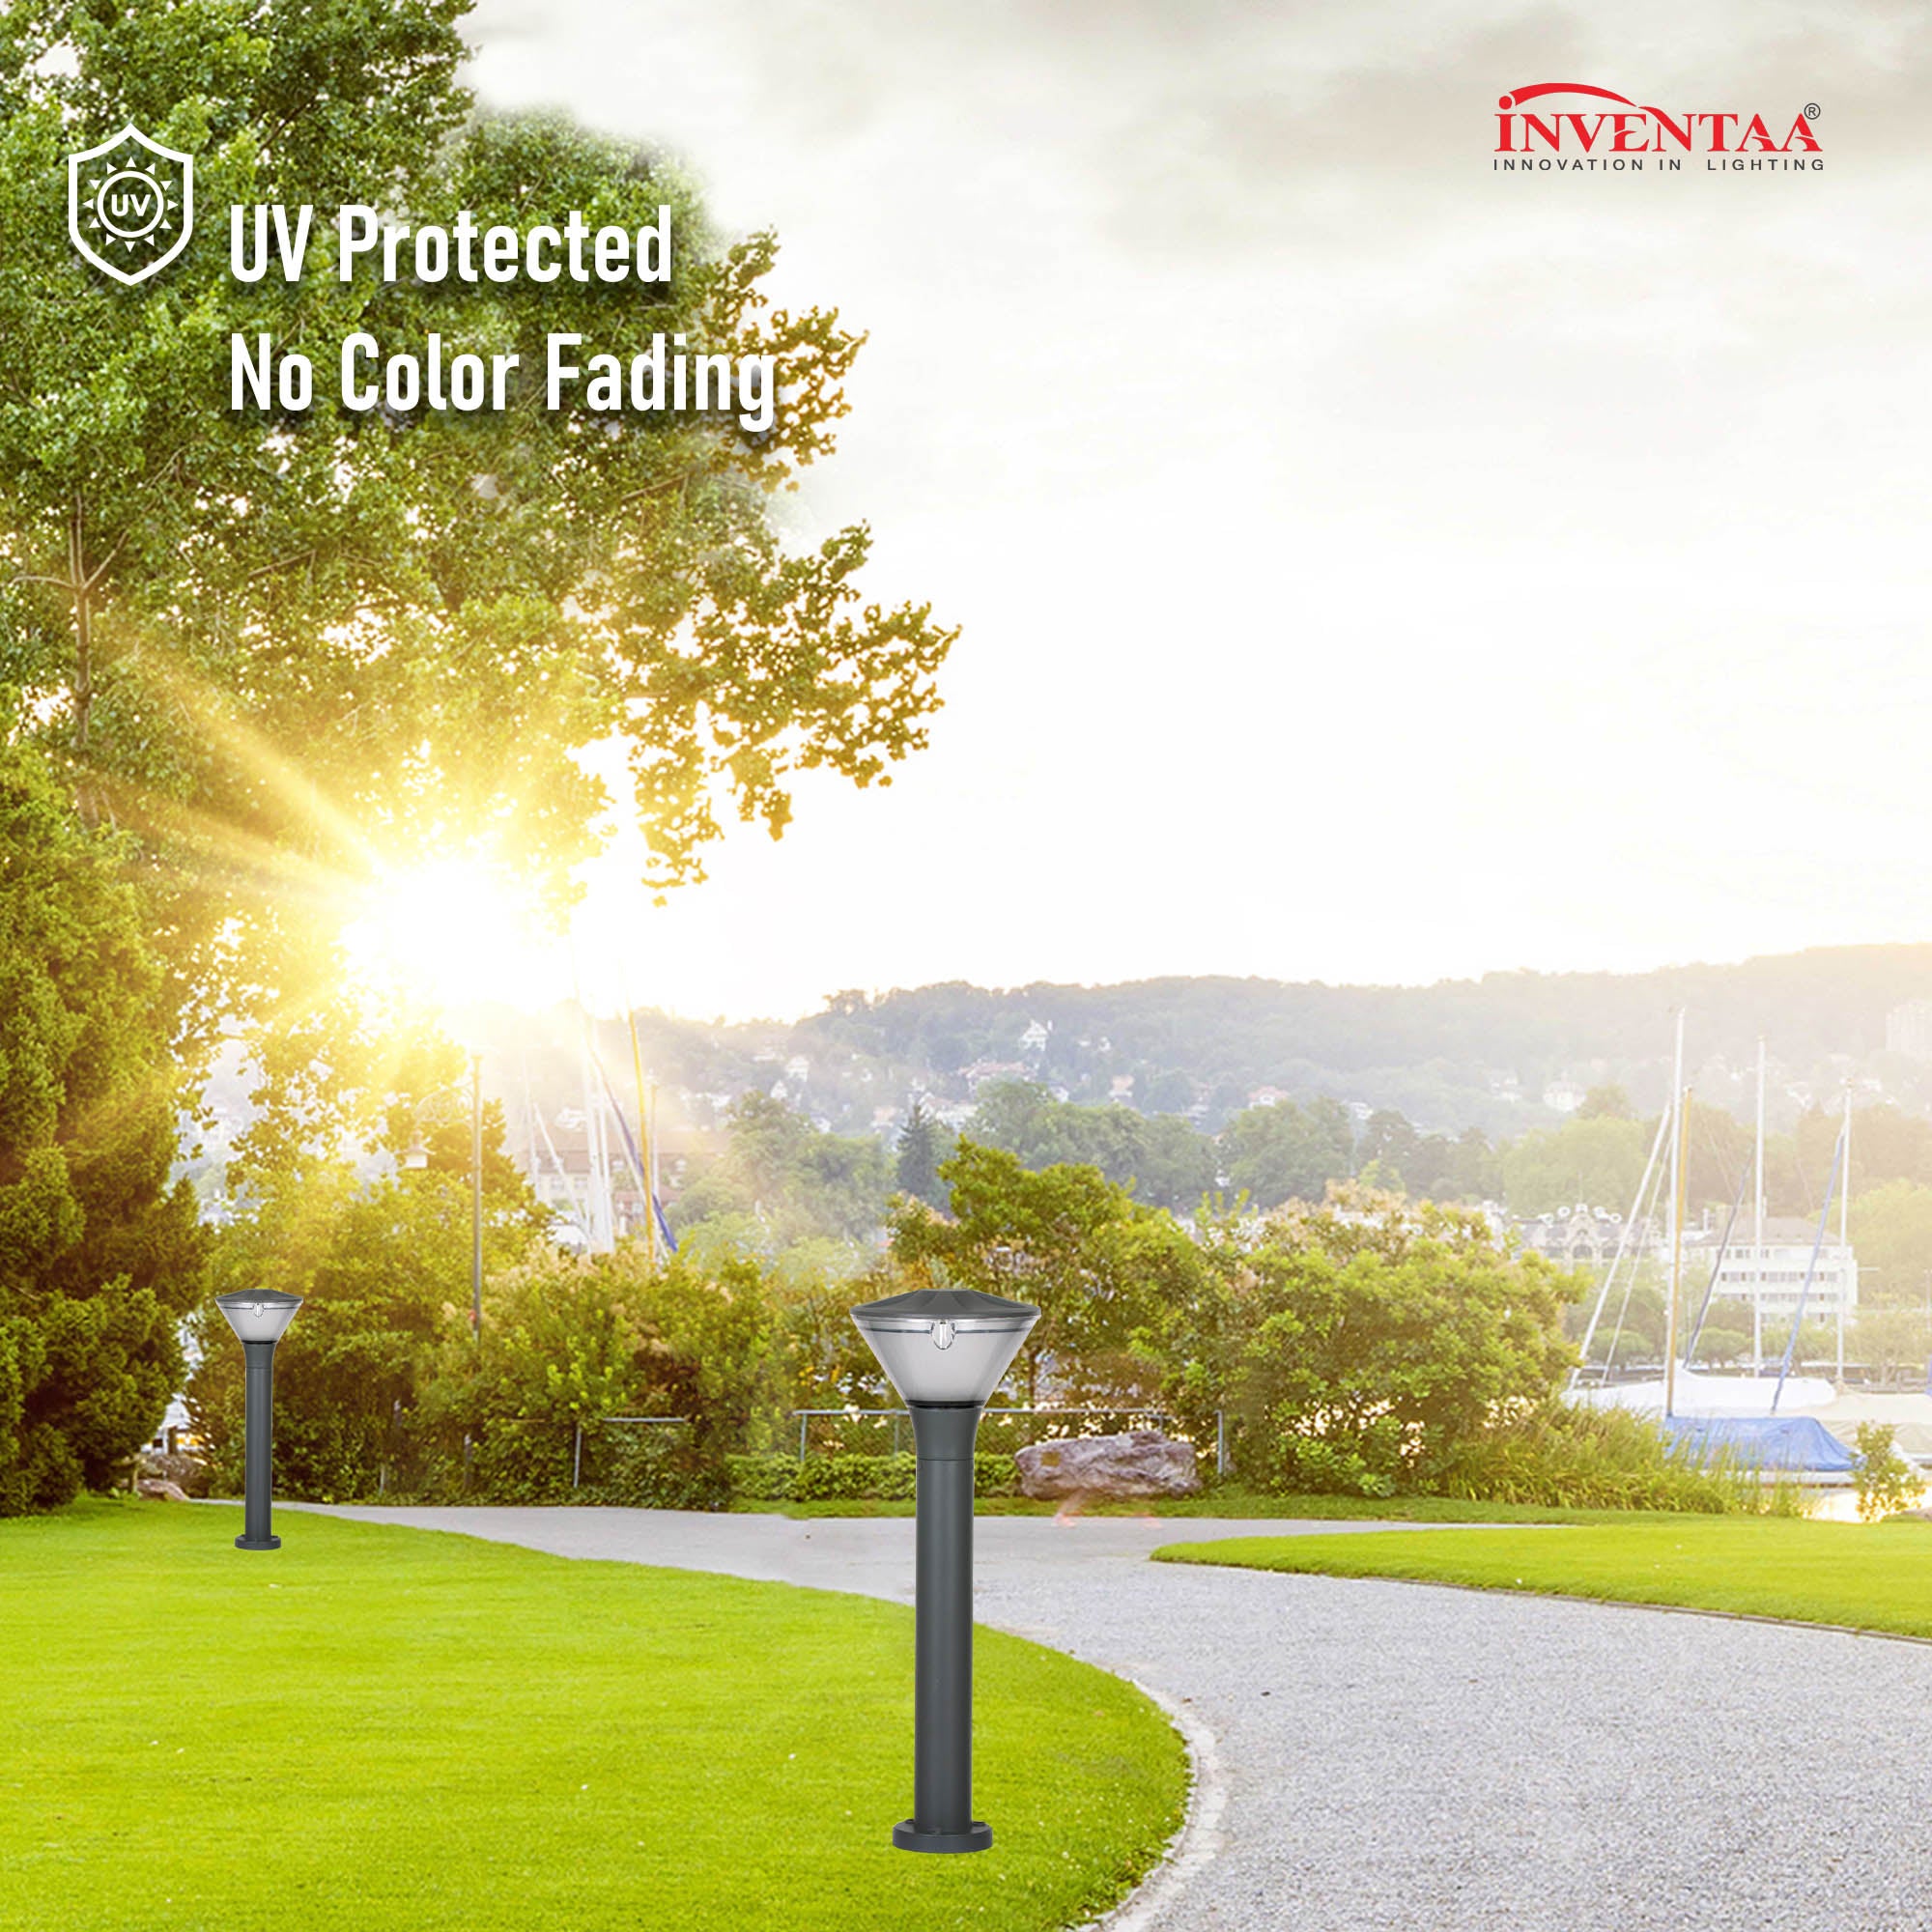 Yash 1 feet led garden bollard light featuring its UV protection and no color fading resistance for enduring performance #size_1 feet